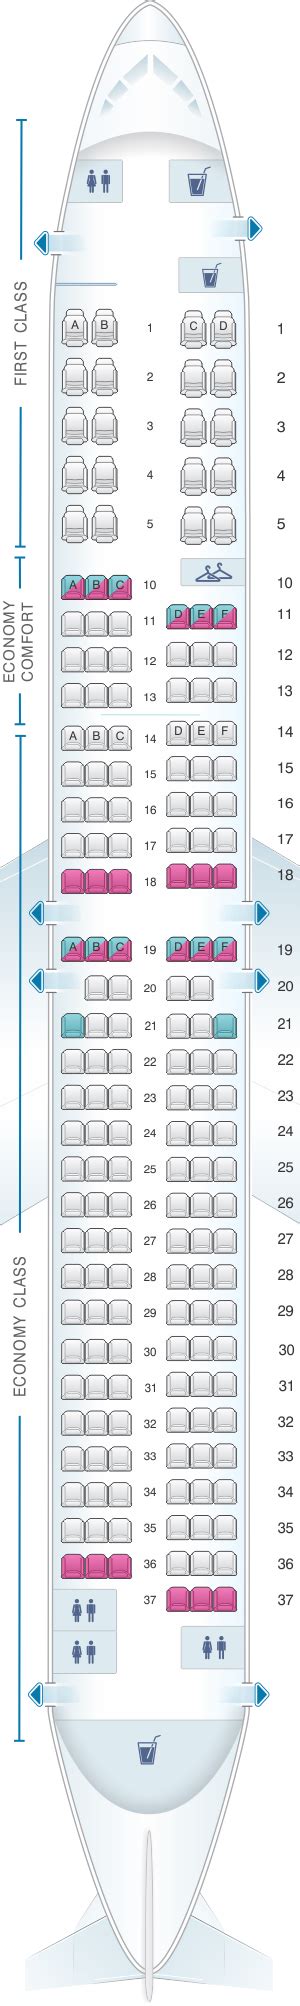 Detailed seat map Delta Air Lines Airbus A319 100. Find the b